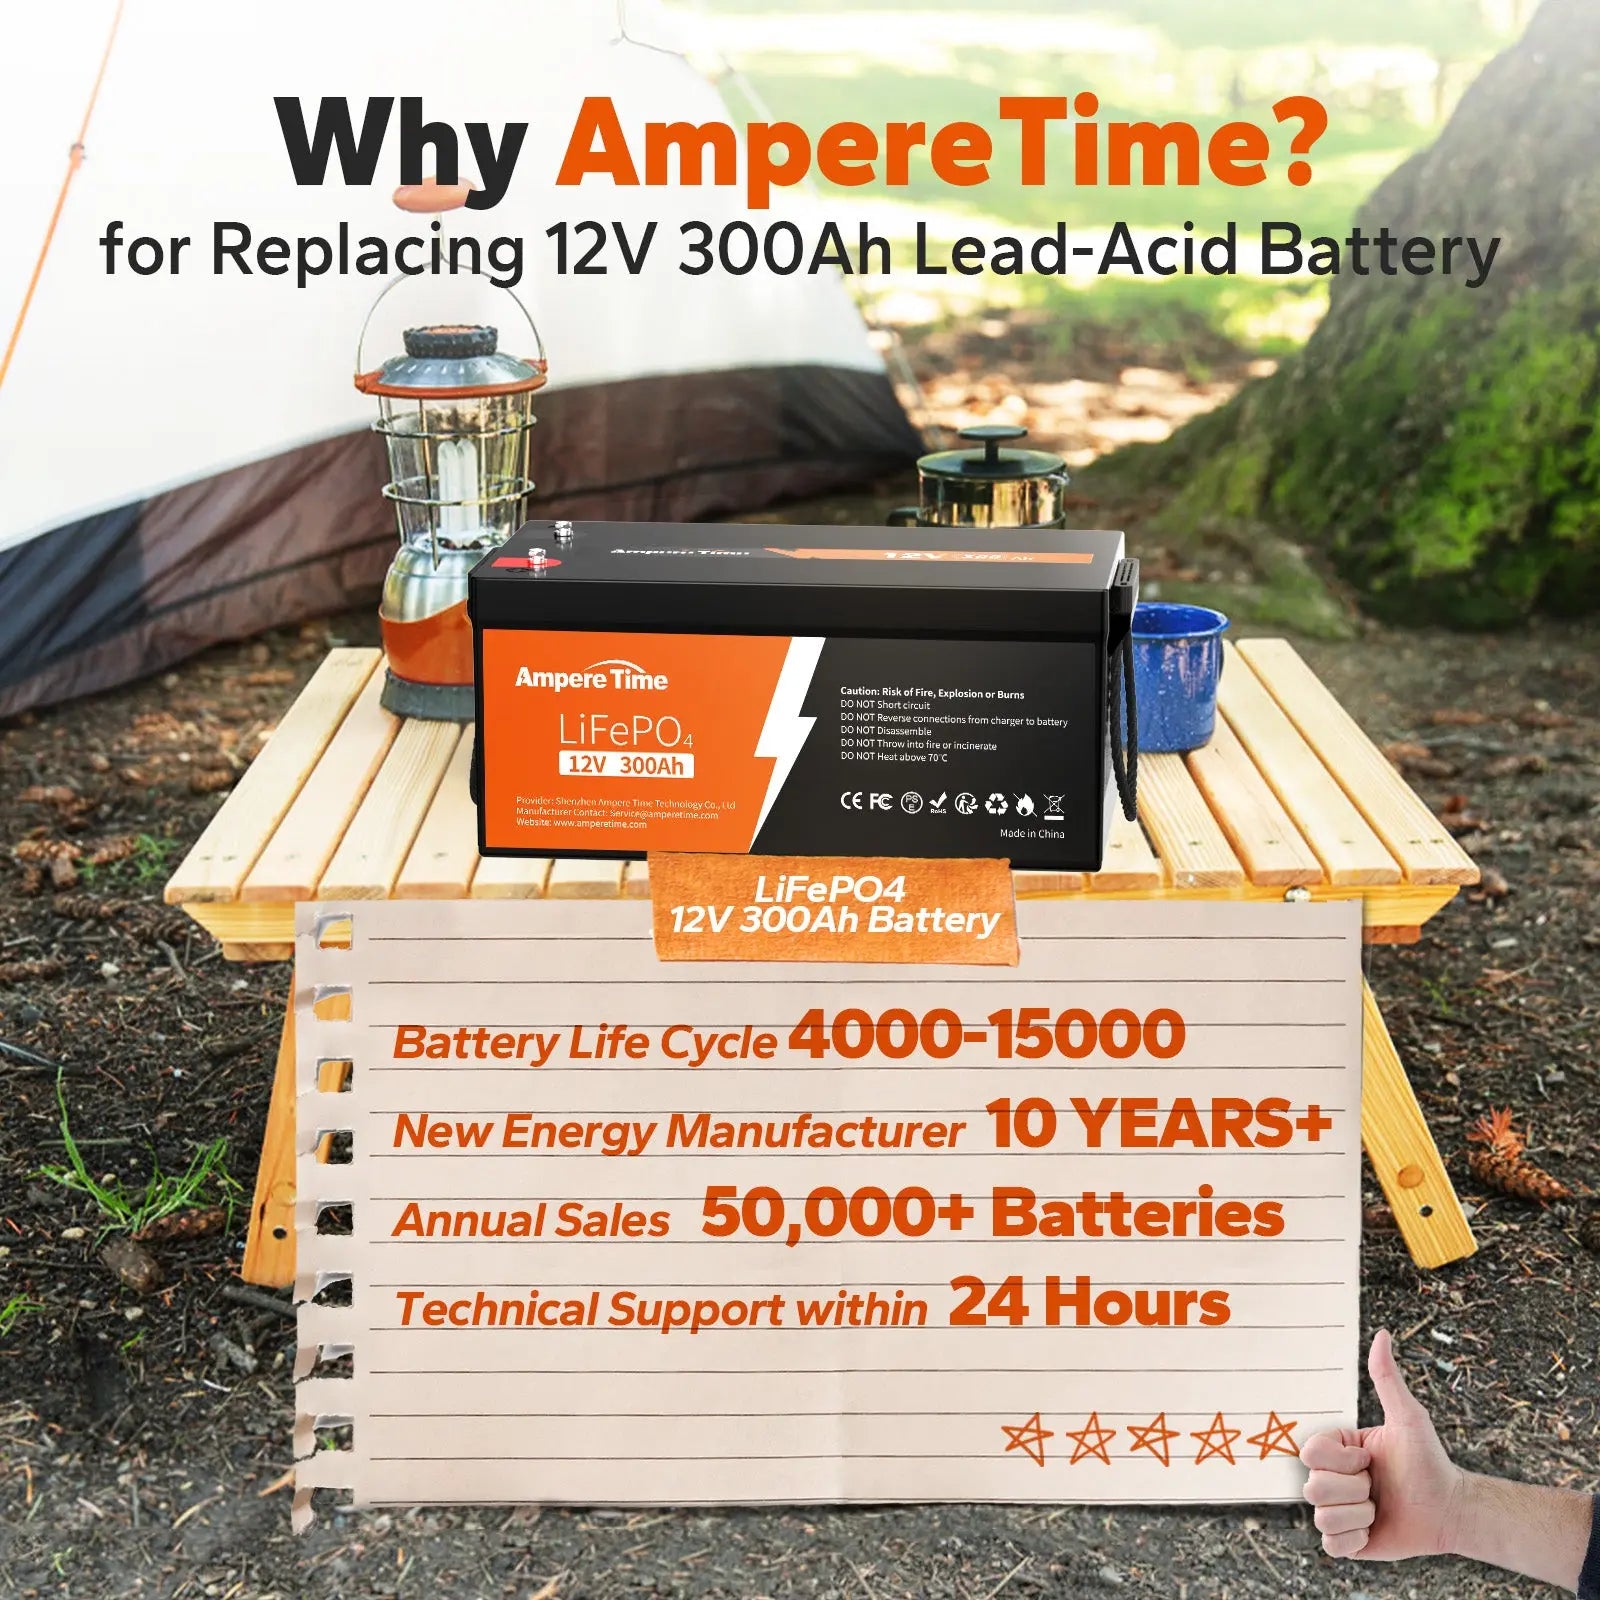 Ampere Time 12V 300Ah, 3840Wh LiFePO4 Battery & Built in 200A BMS Ampere Time